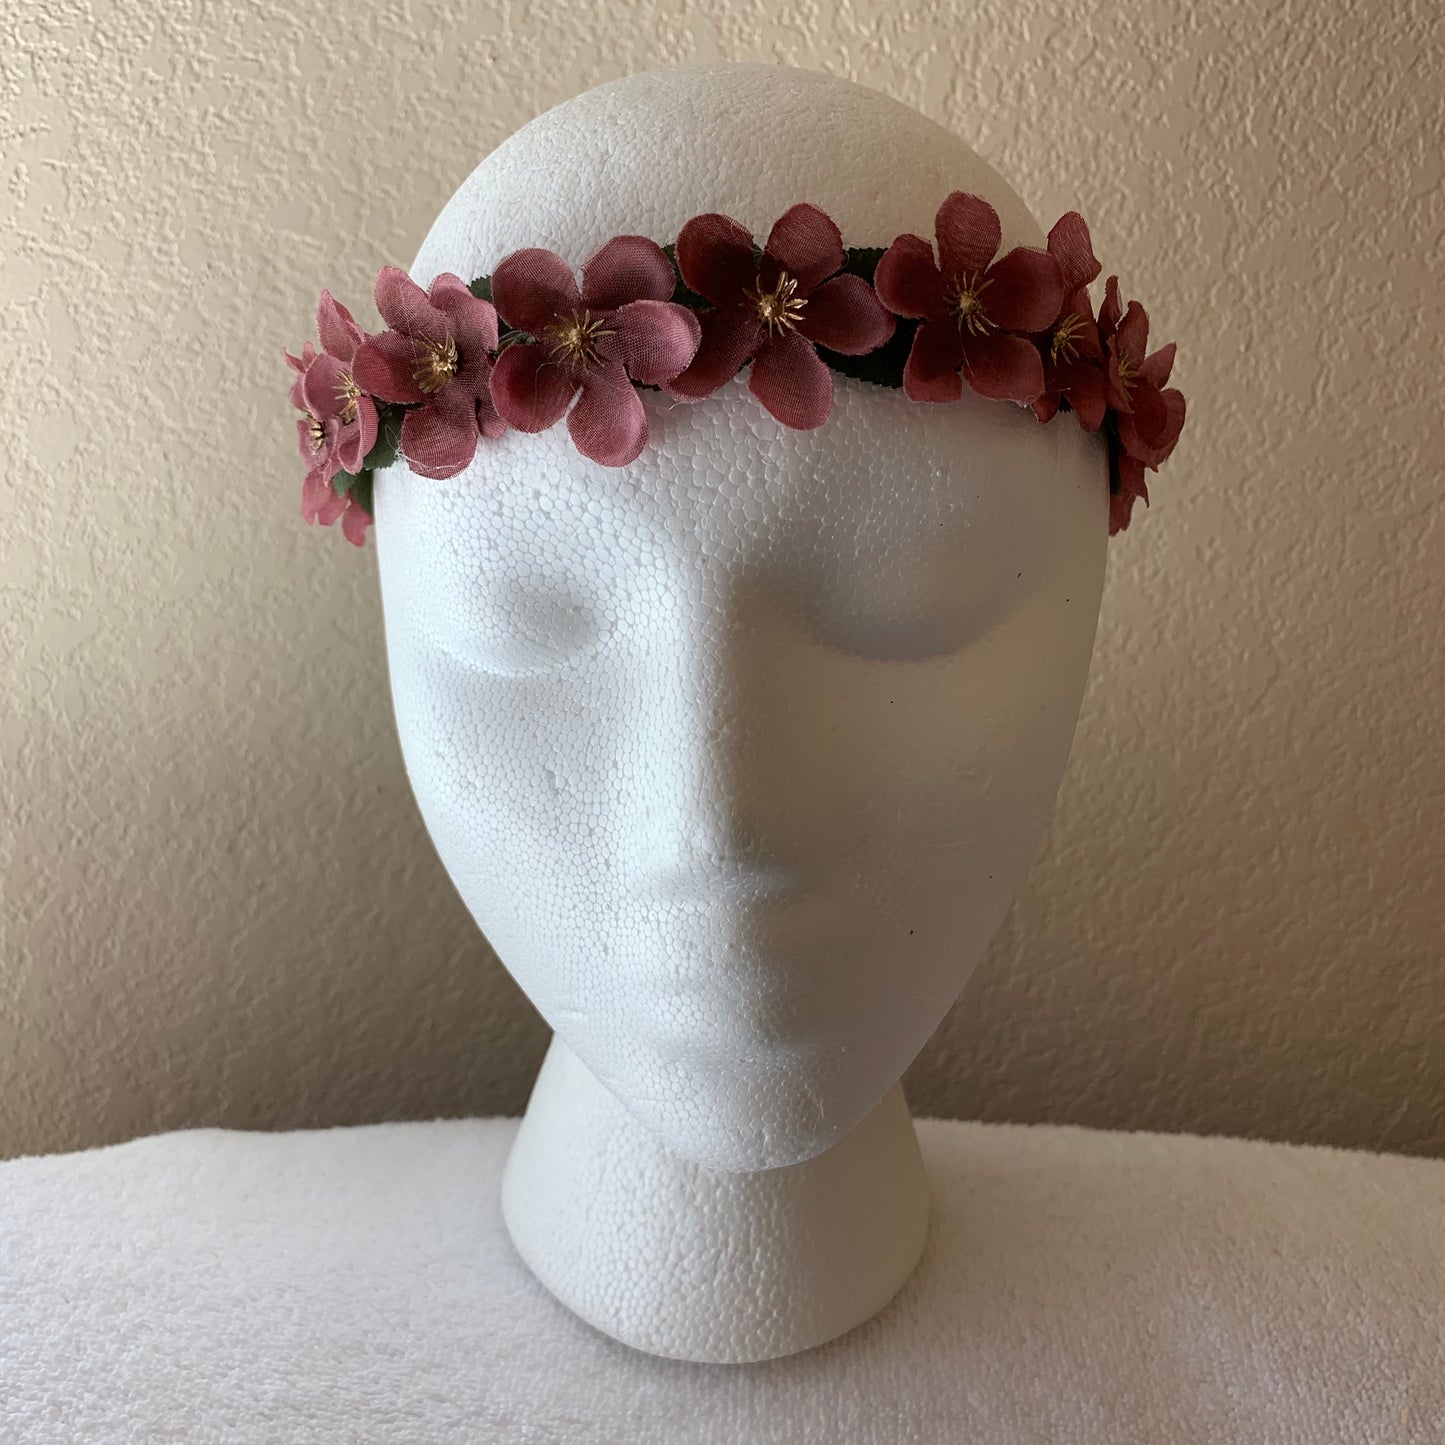 Extra Small Wreath - Burgundy Flowers with Gold Centers